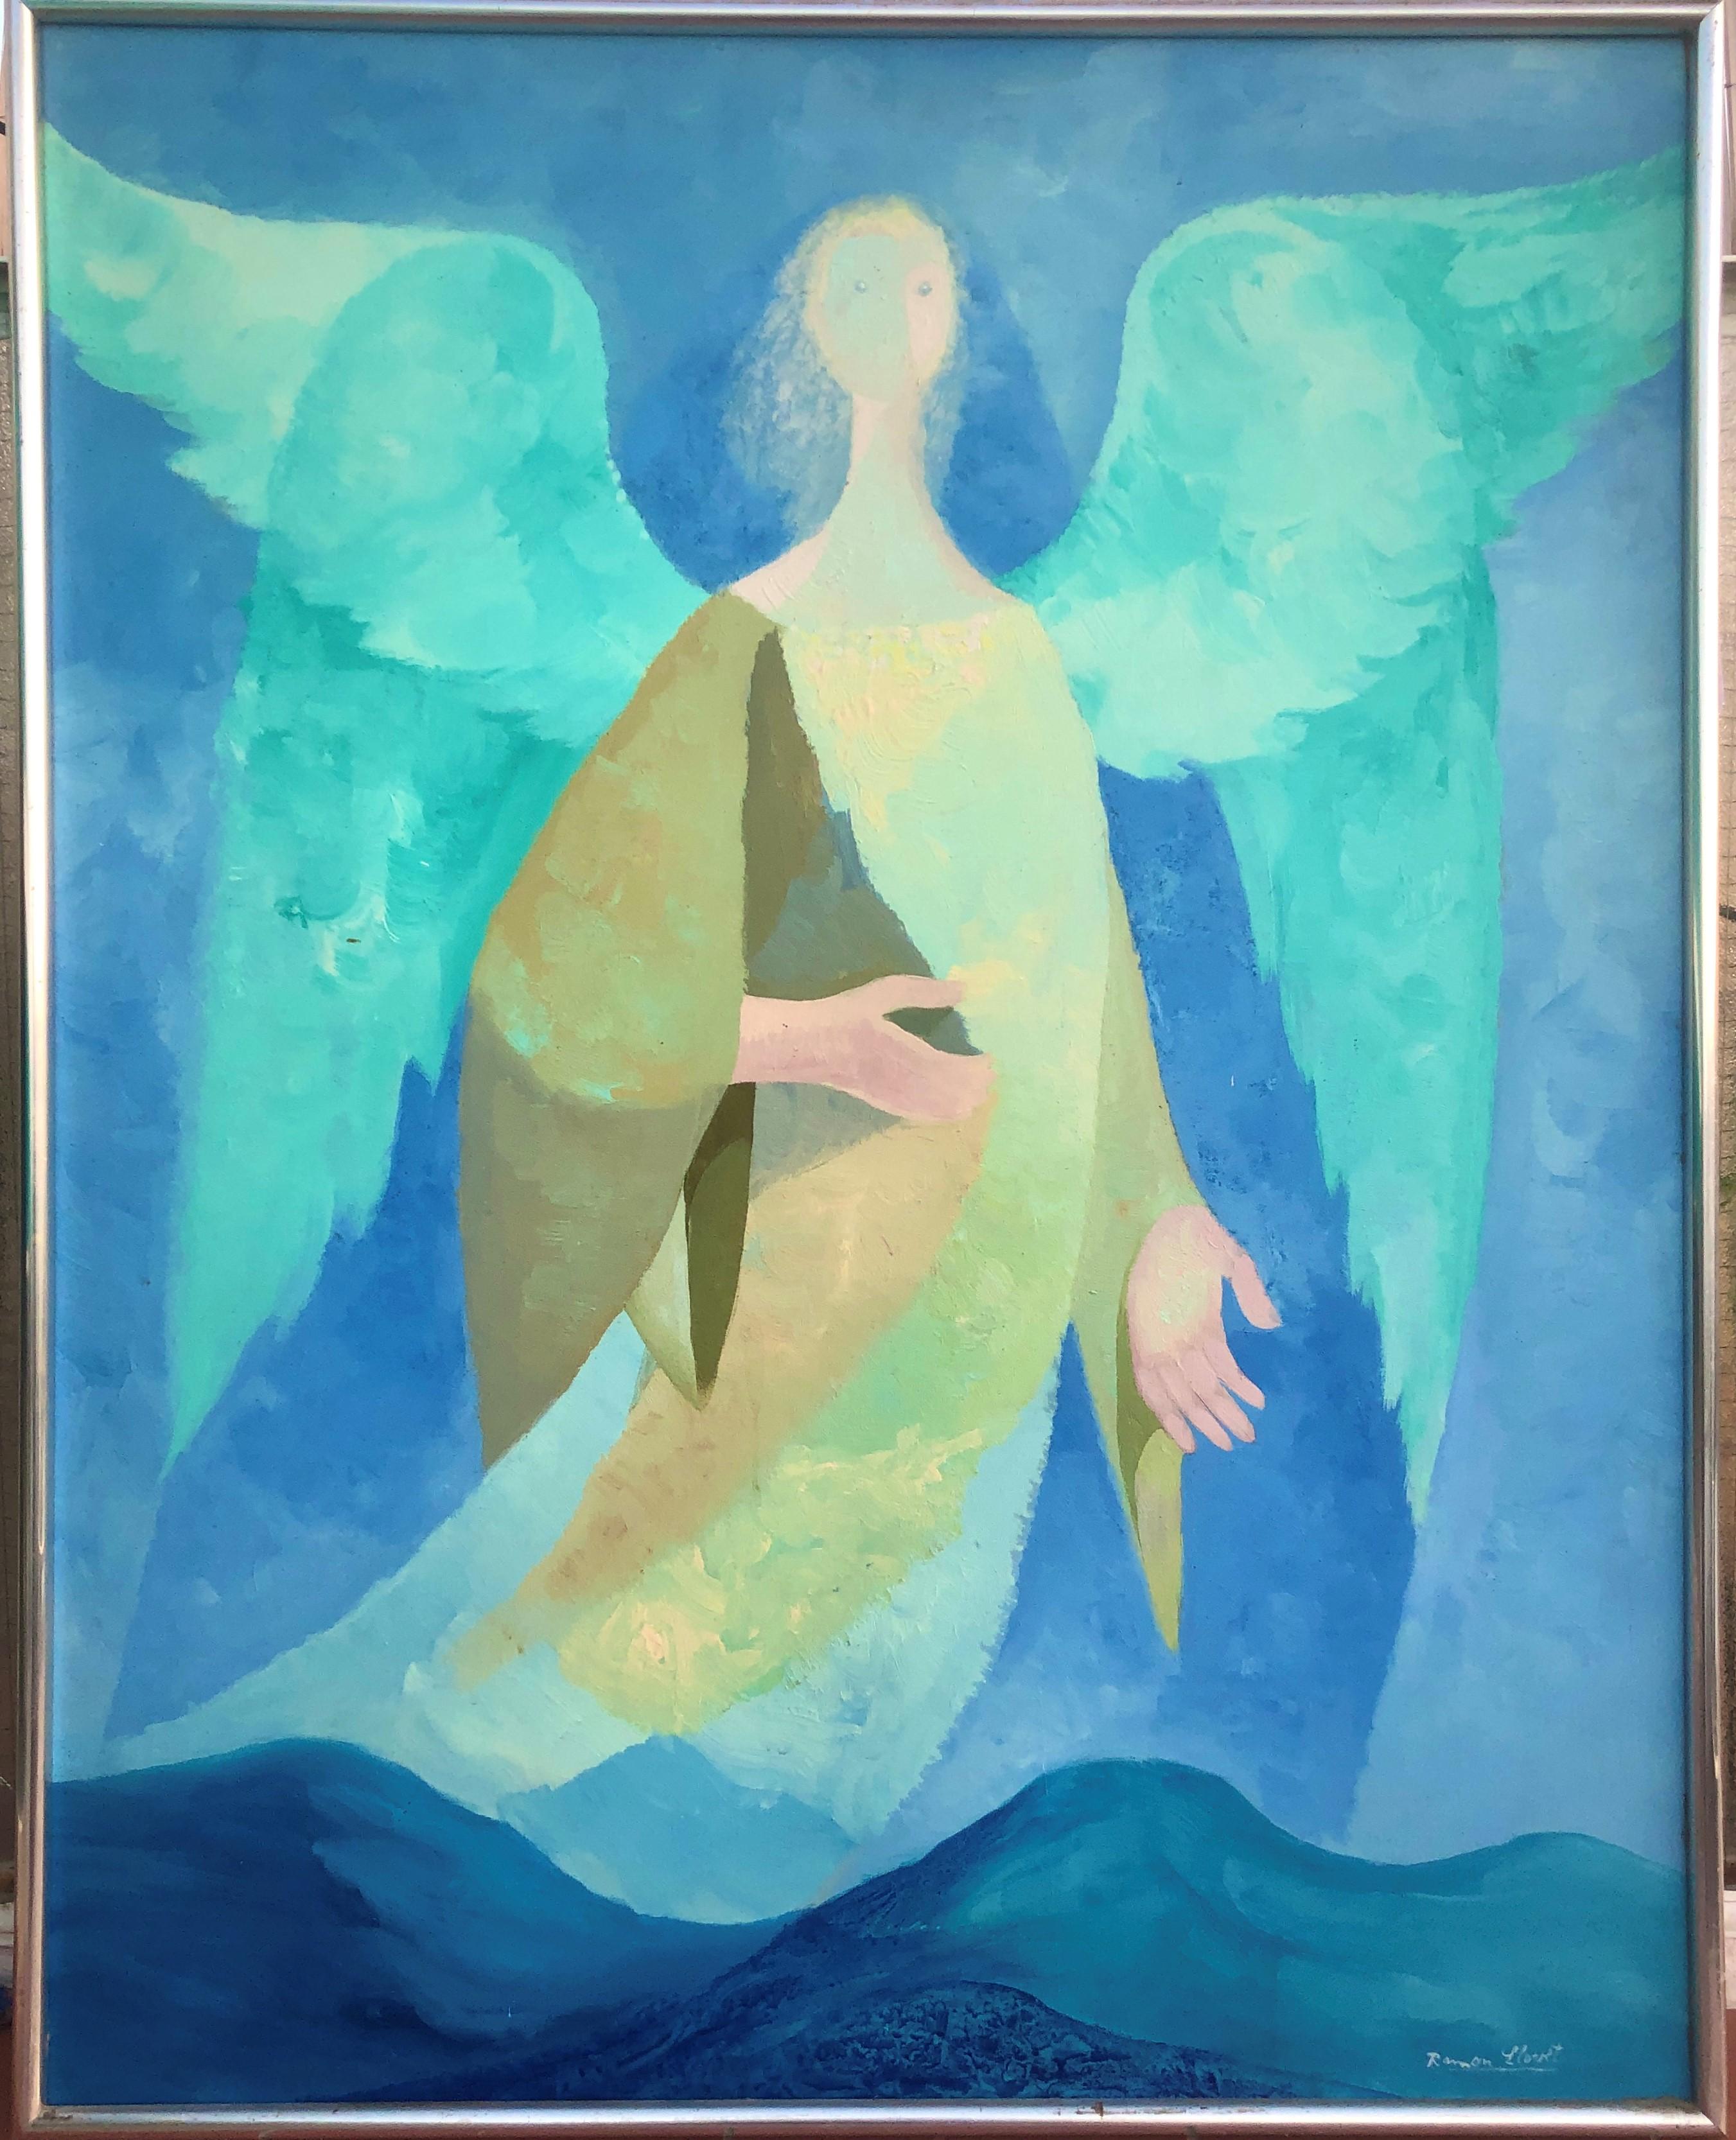 The Angel oil on canvas painting surrealist - Painting by Ramon Llovet Miserol